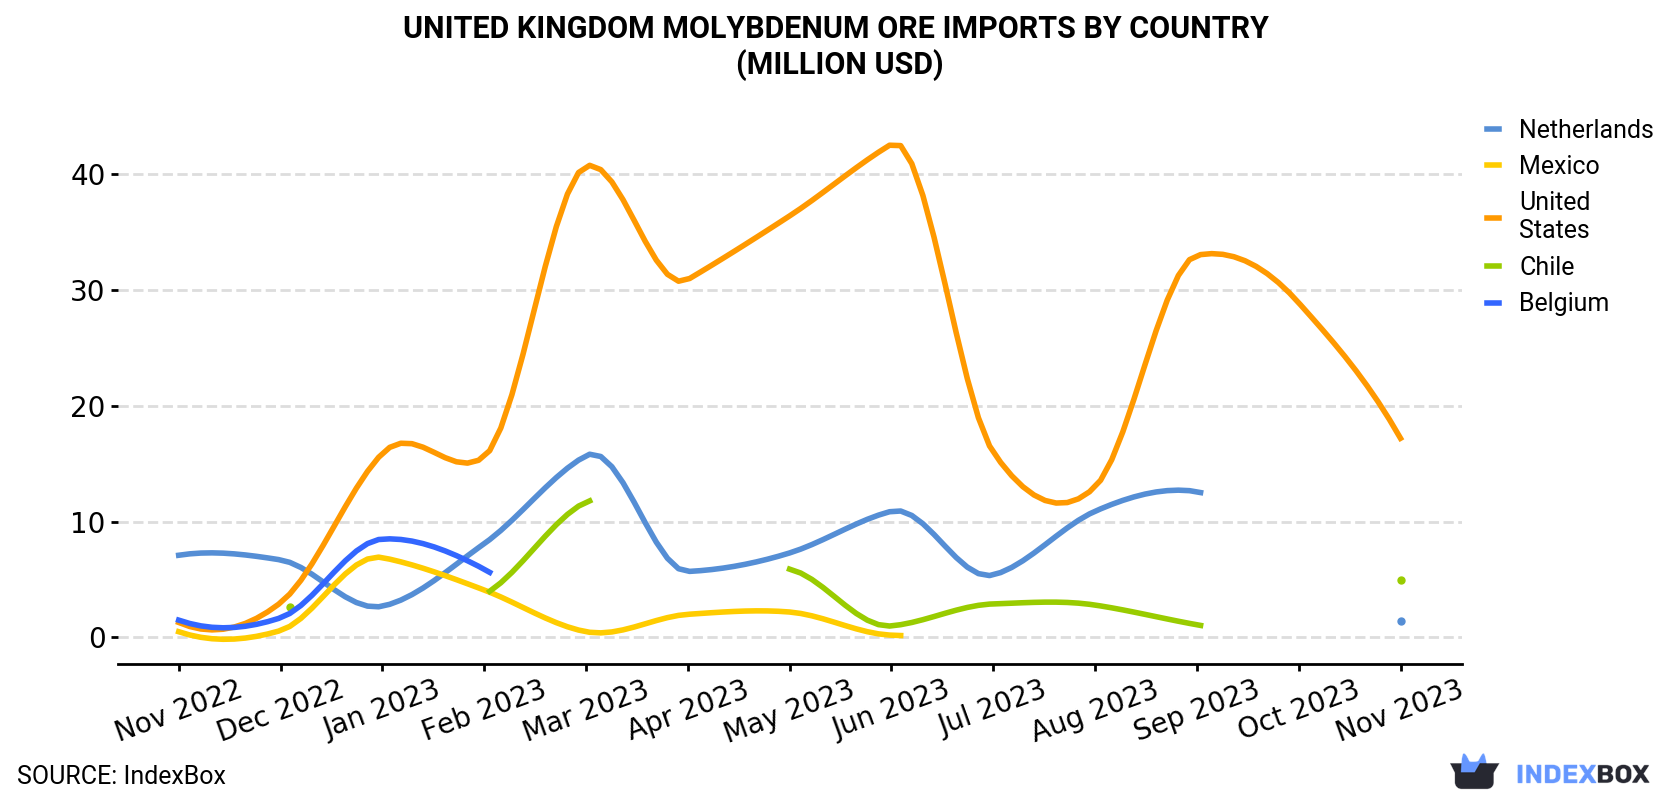 United Kingdom Molybdenum Ore Imports By Country (Million USD)